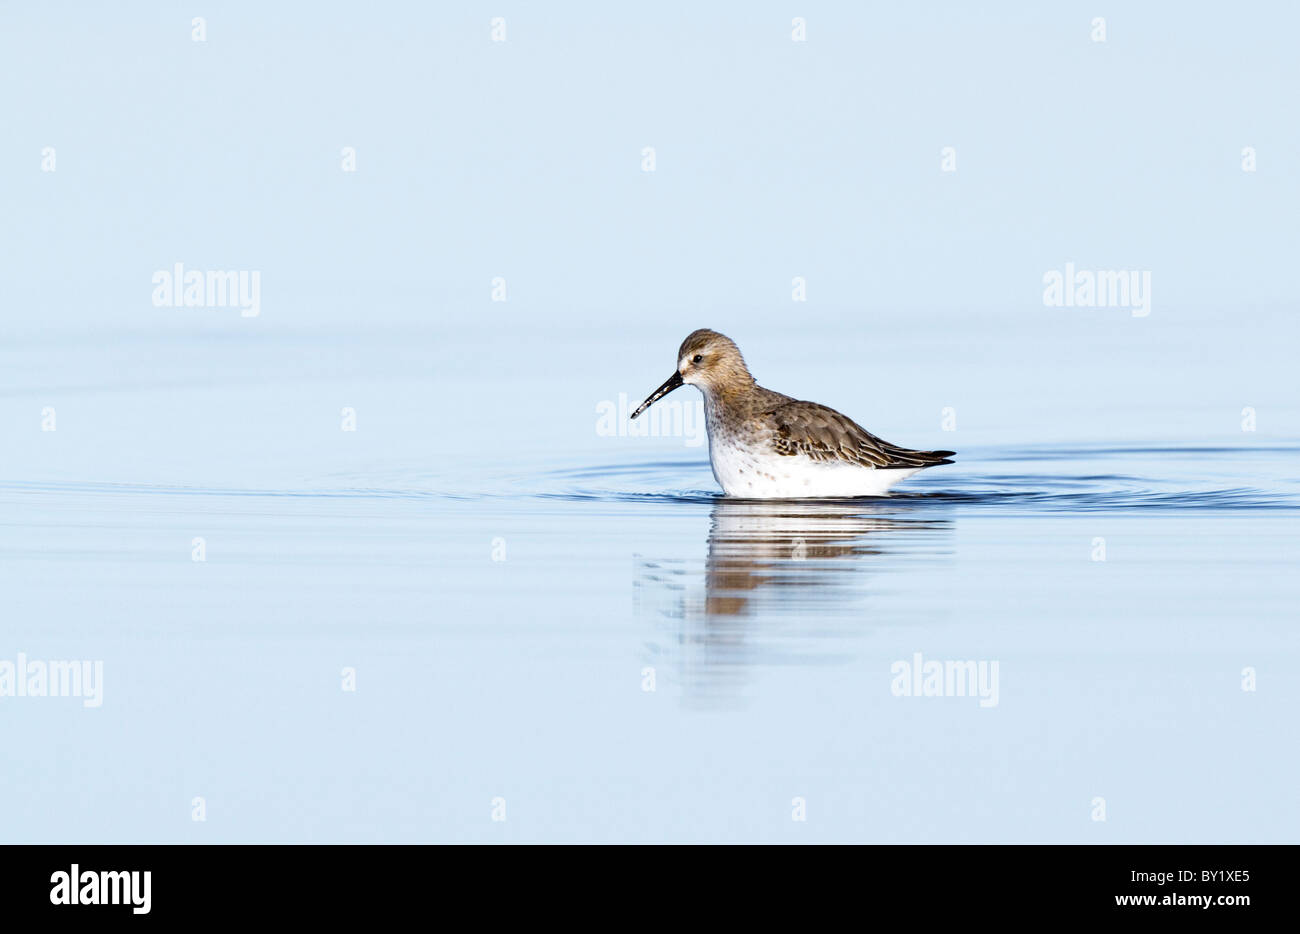 Wading dunlin fishing in a pool Stock Photo